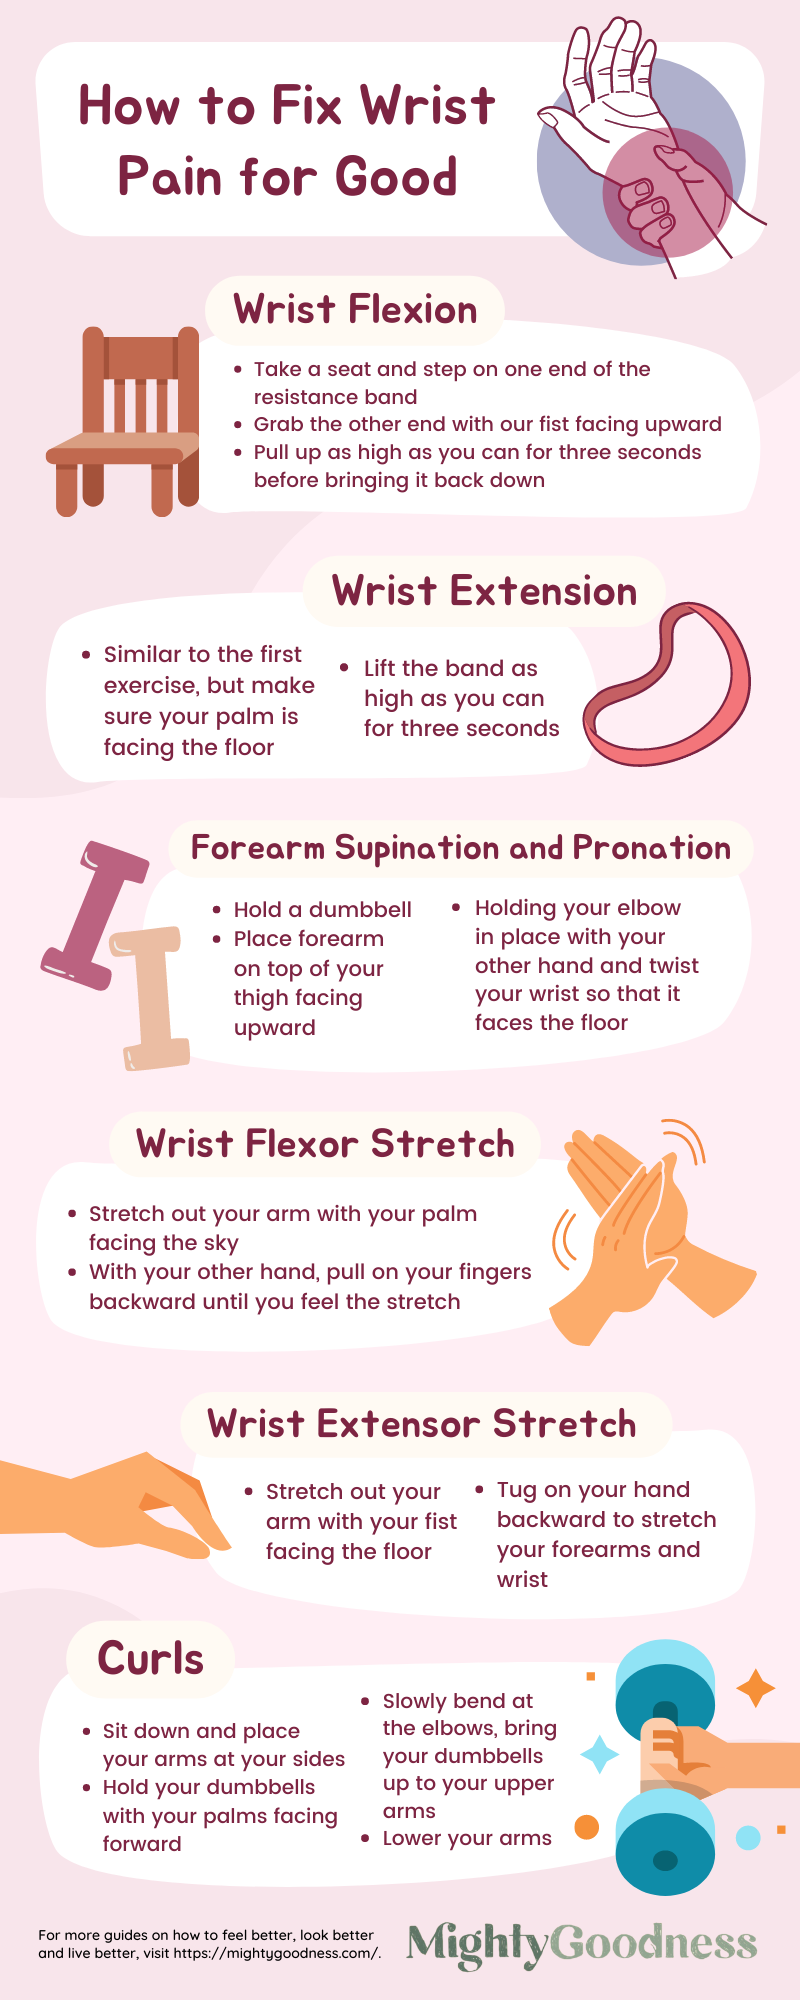 How To Fix Wrist Pain for Good